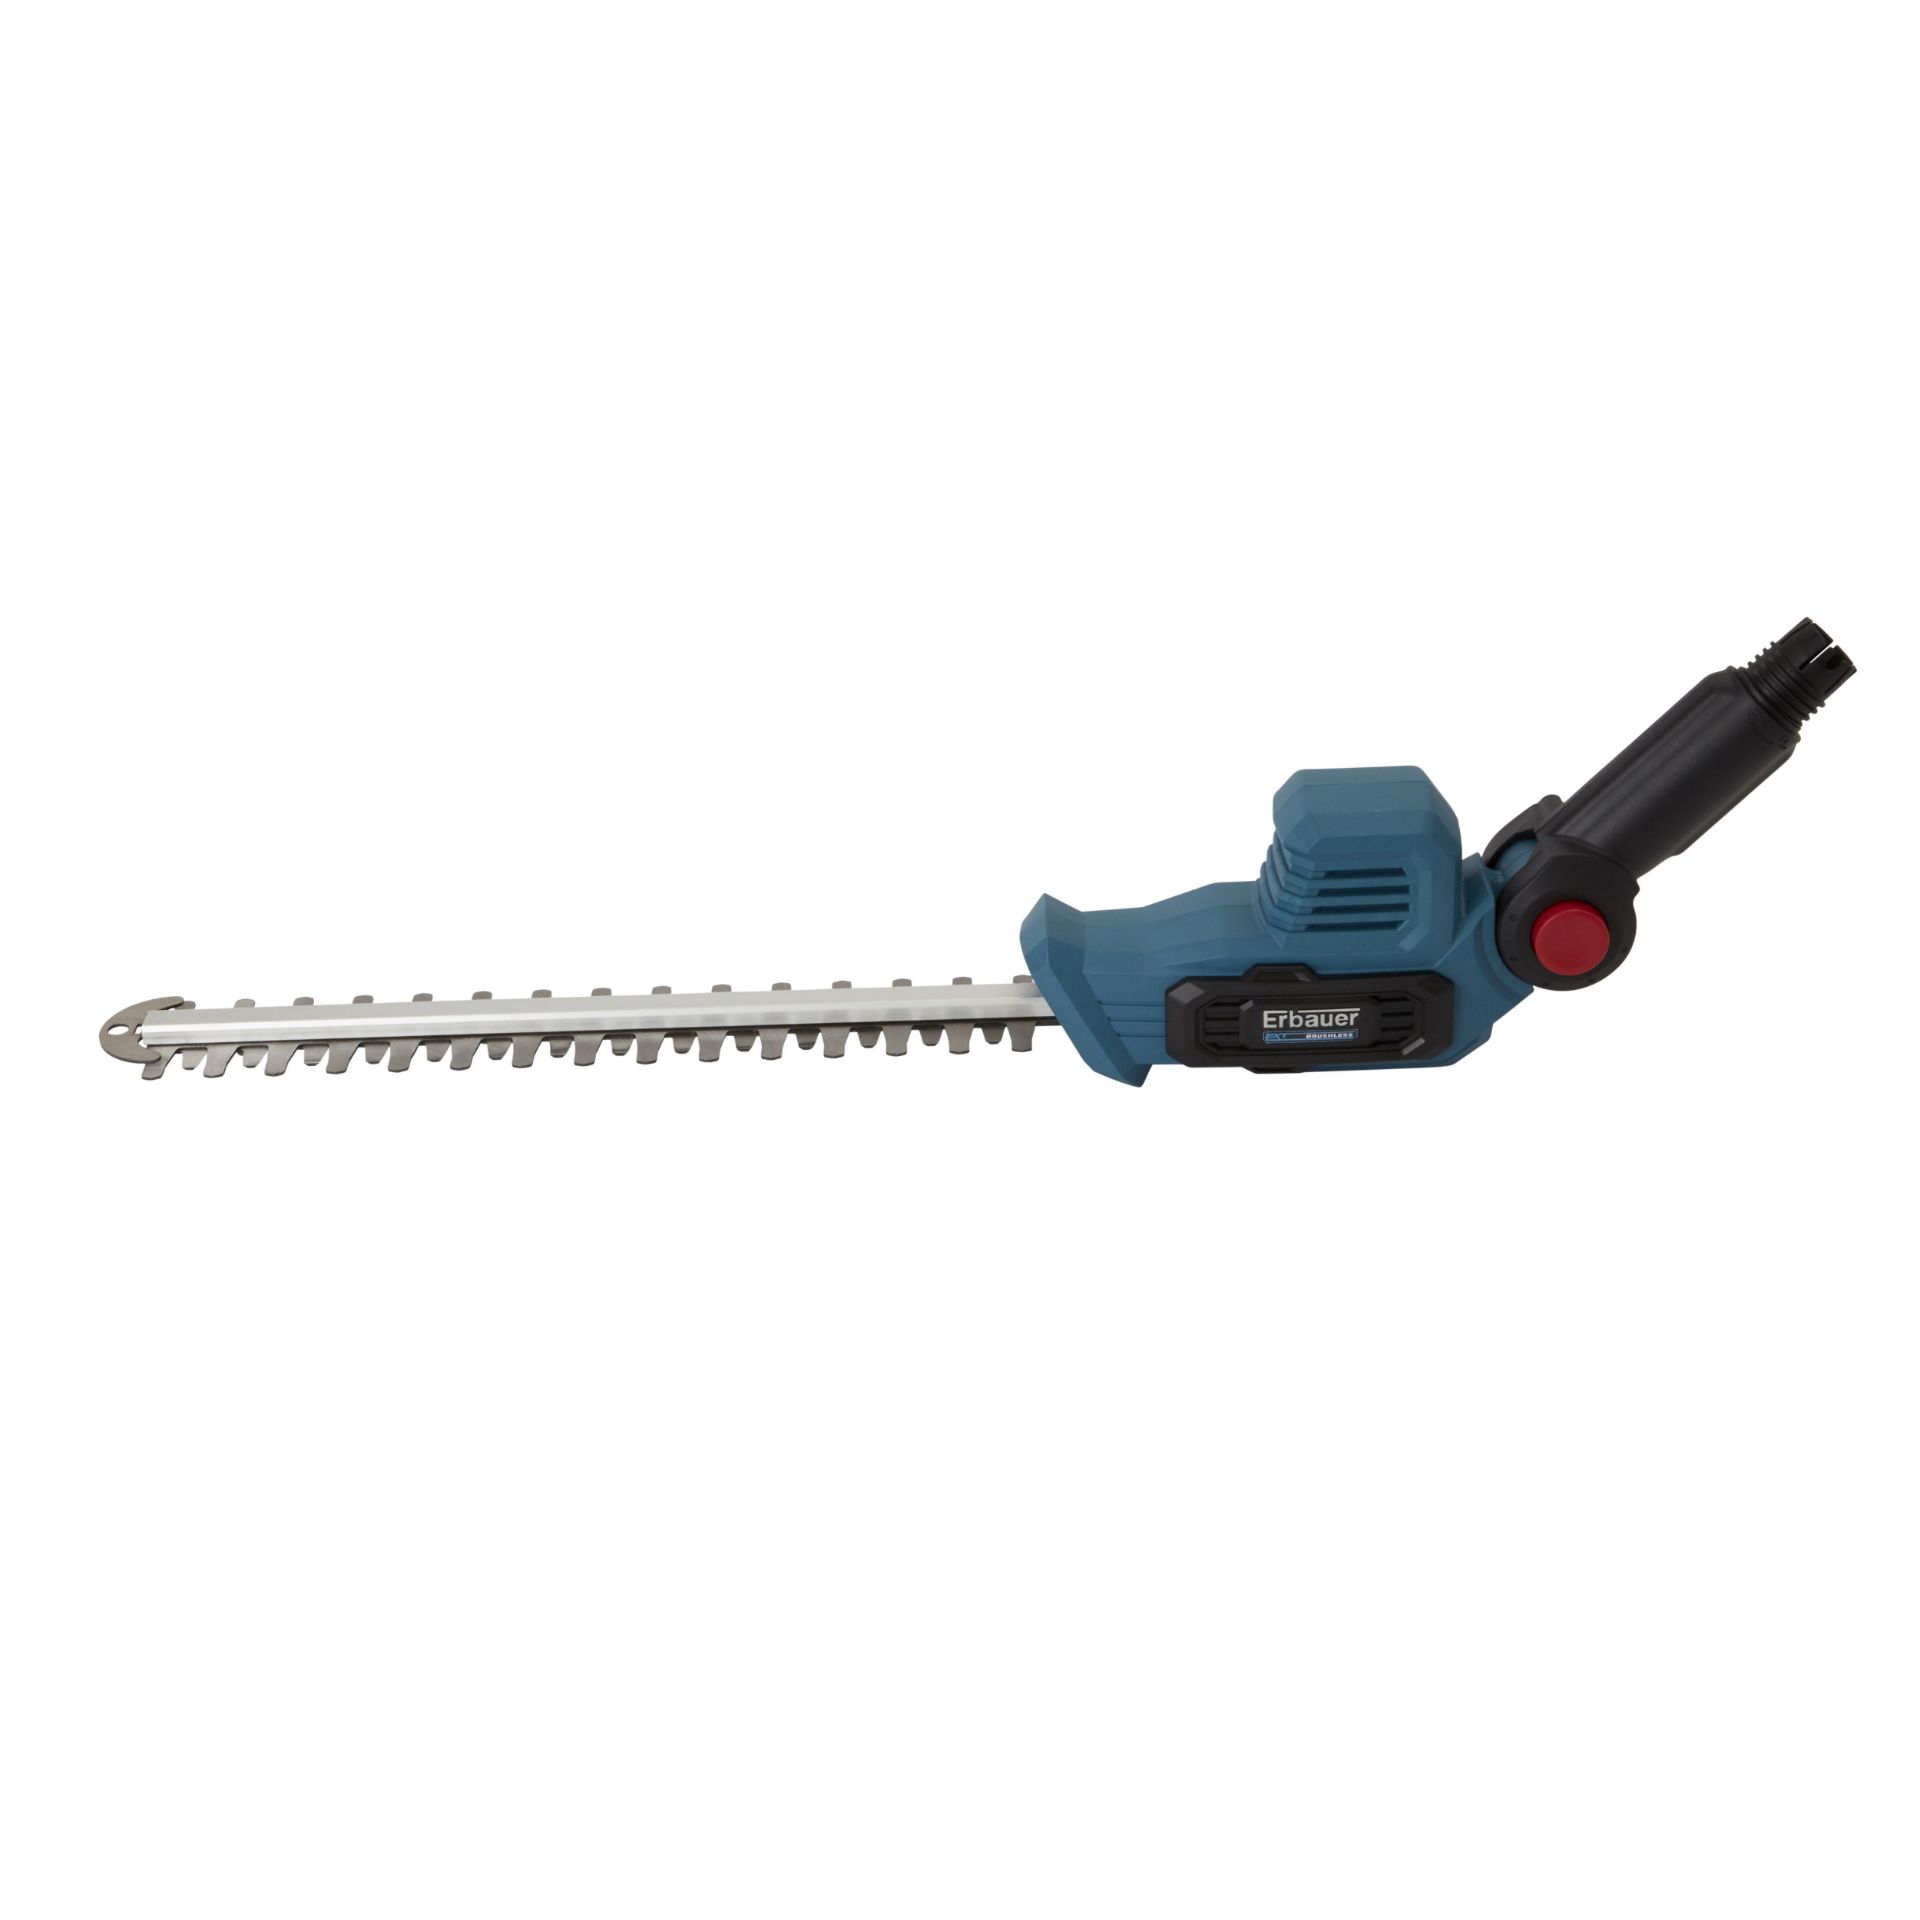 Erbauer Pole 18V 450mm Epht18-Li - Kit Cordless Hedge Trimmer (LOCATION - H/S 1.2.1) The tool use